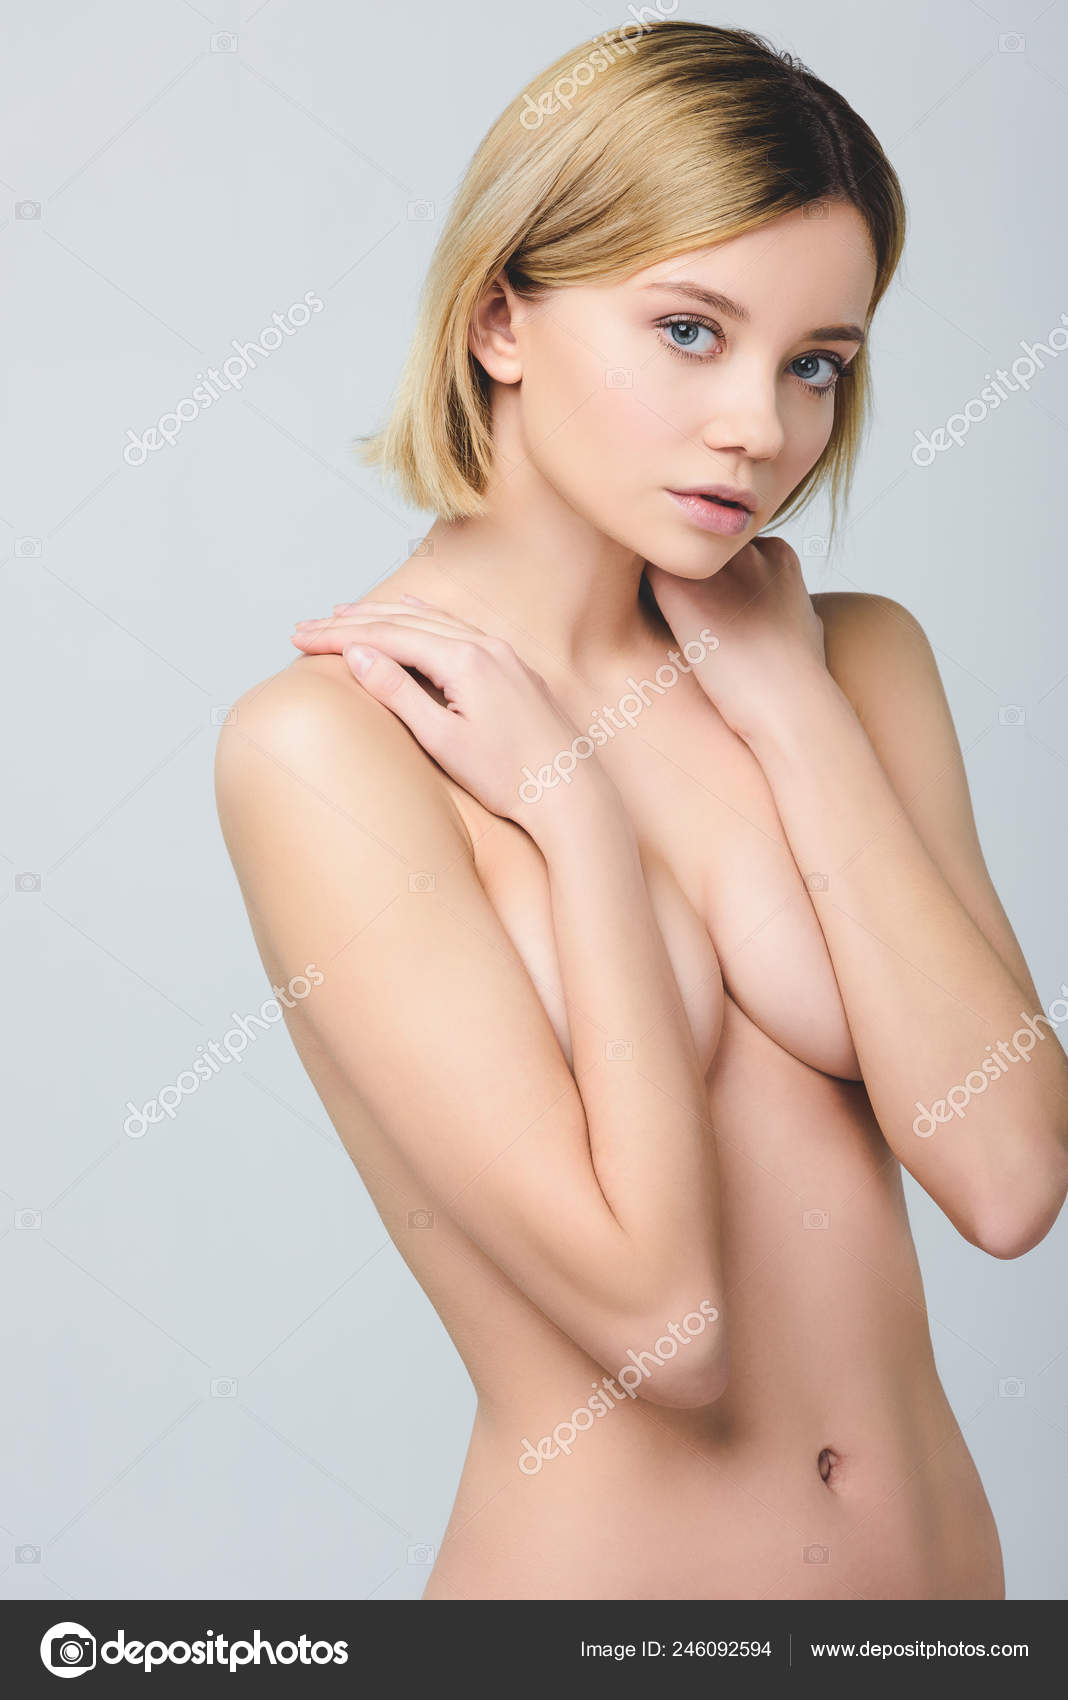 Blonde Naked Woman